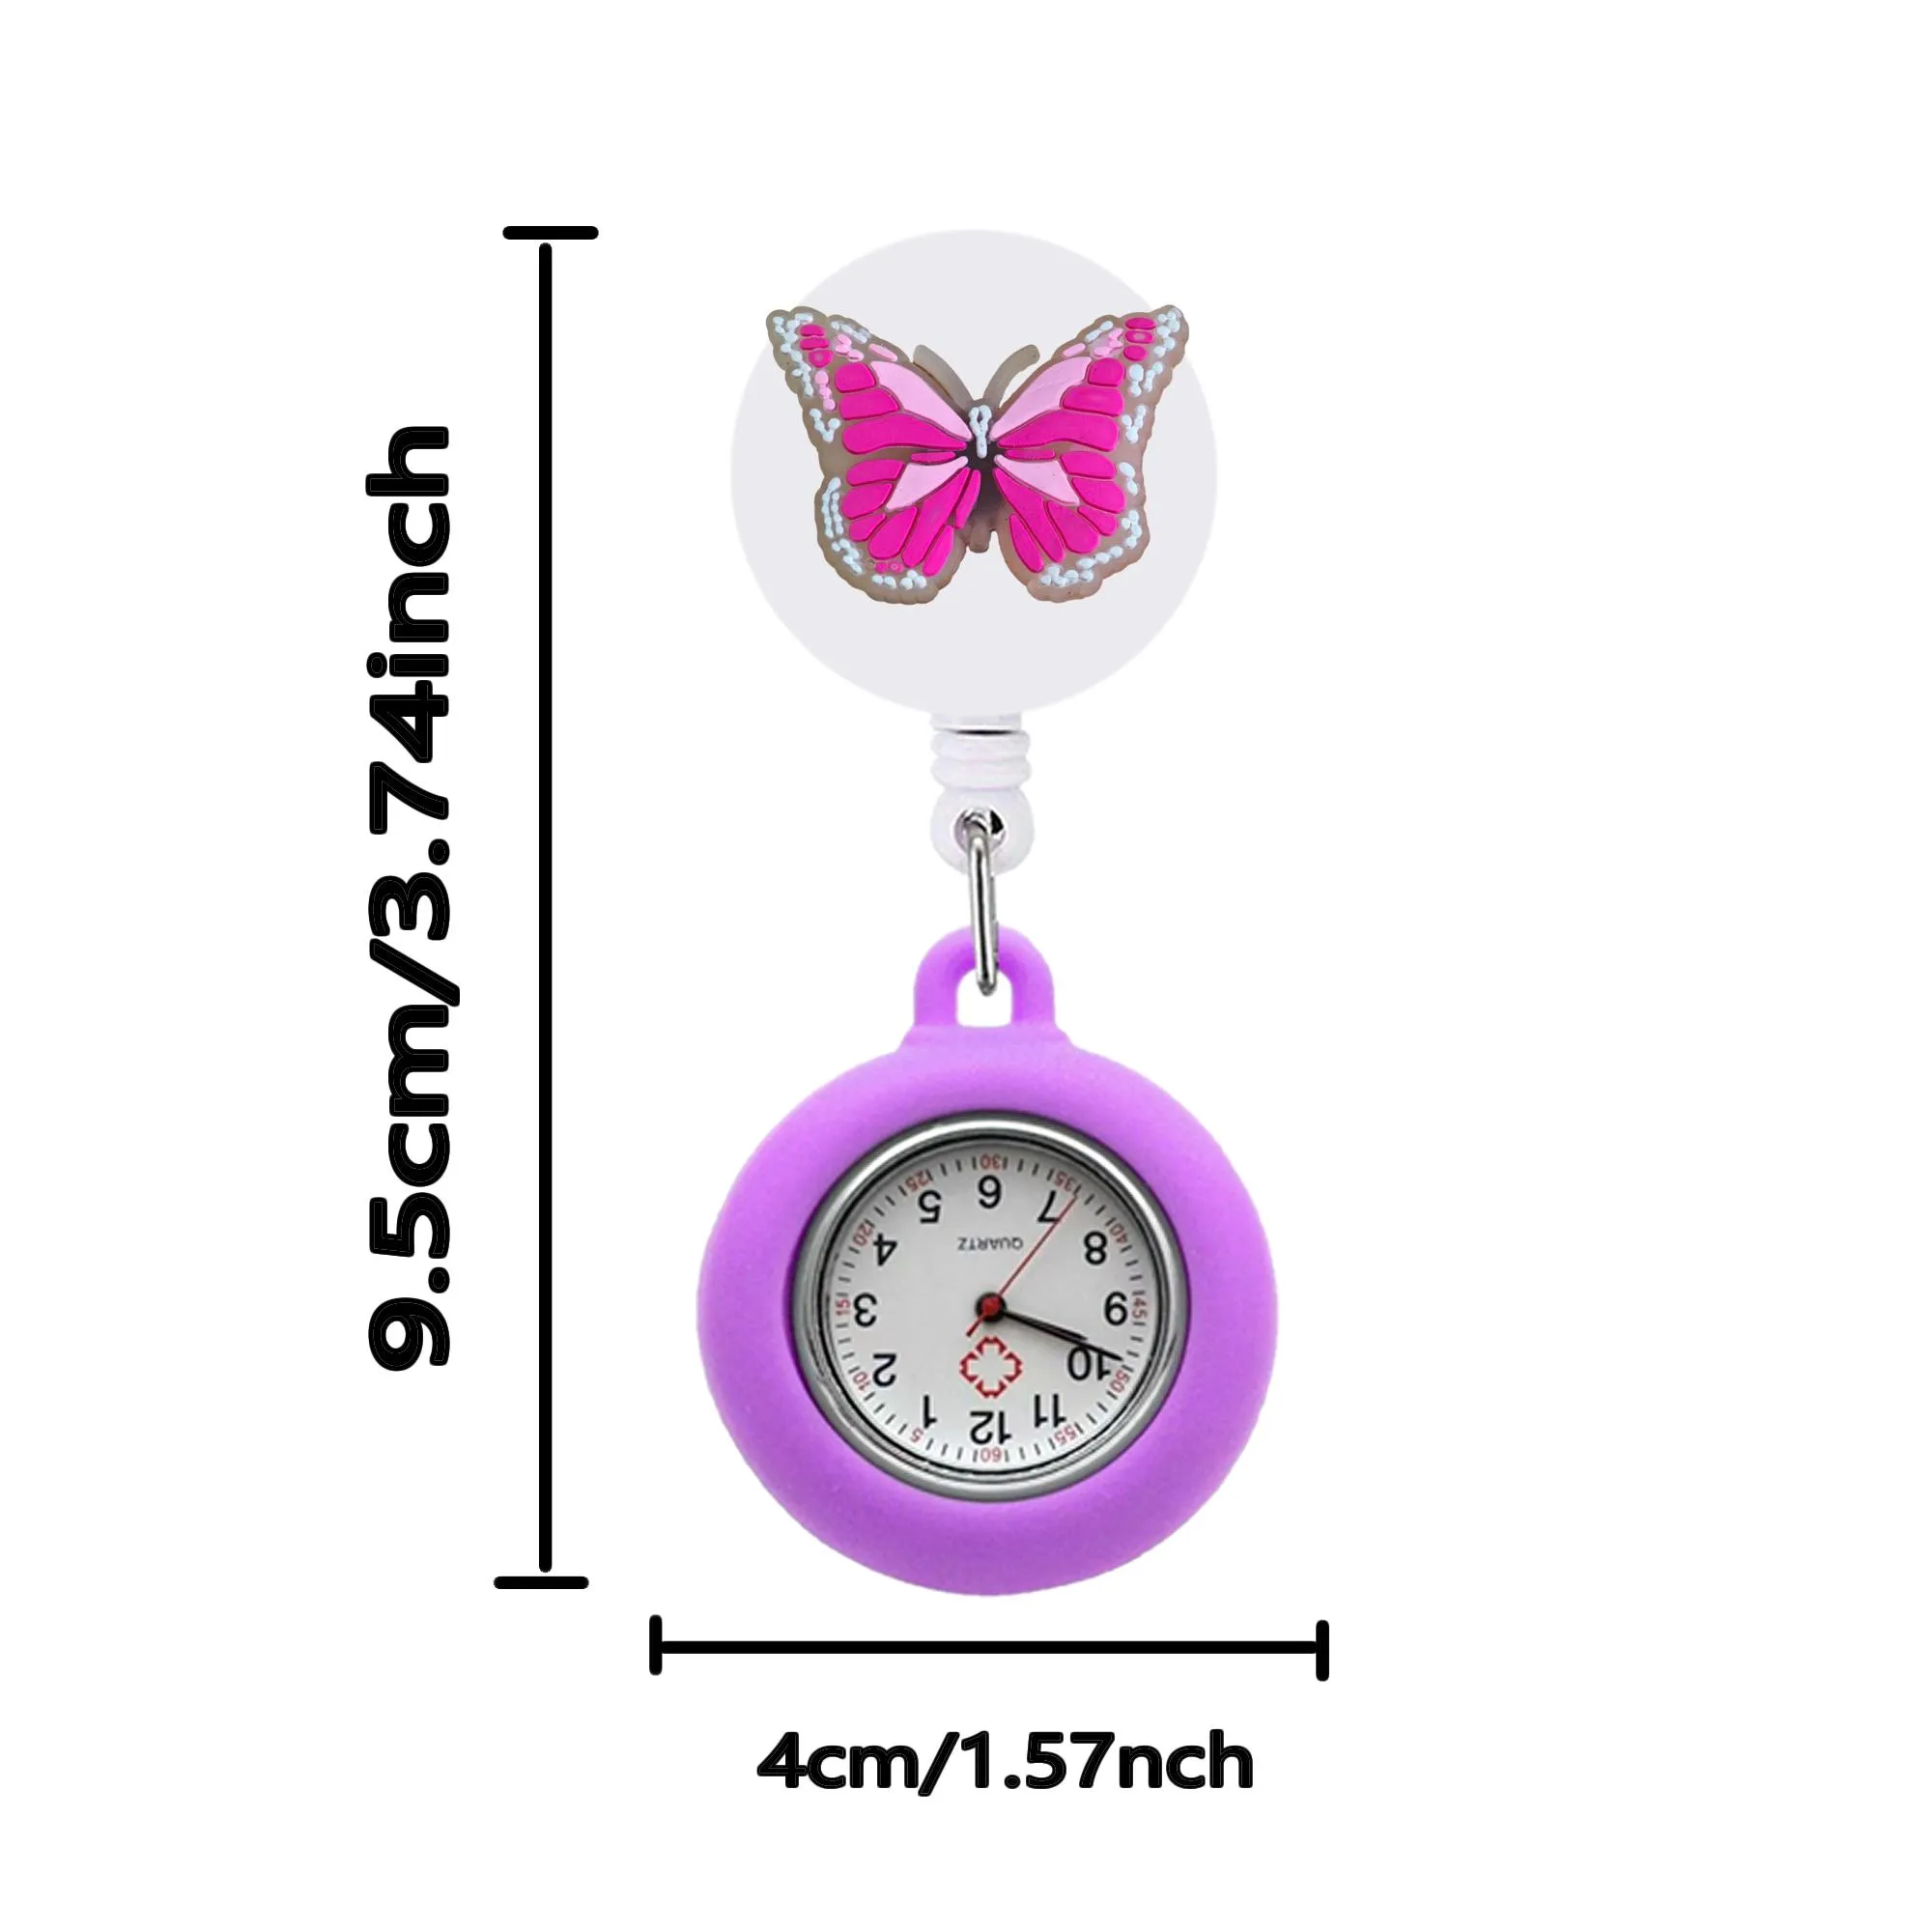 fluorescent butterfly 6 clip pocket watches nurse watch glow pointer in the dark retractable digital fob clock gift arabic numeral dial silicone brooch medical